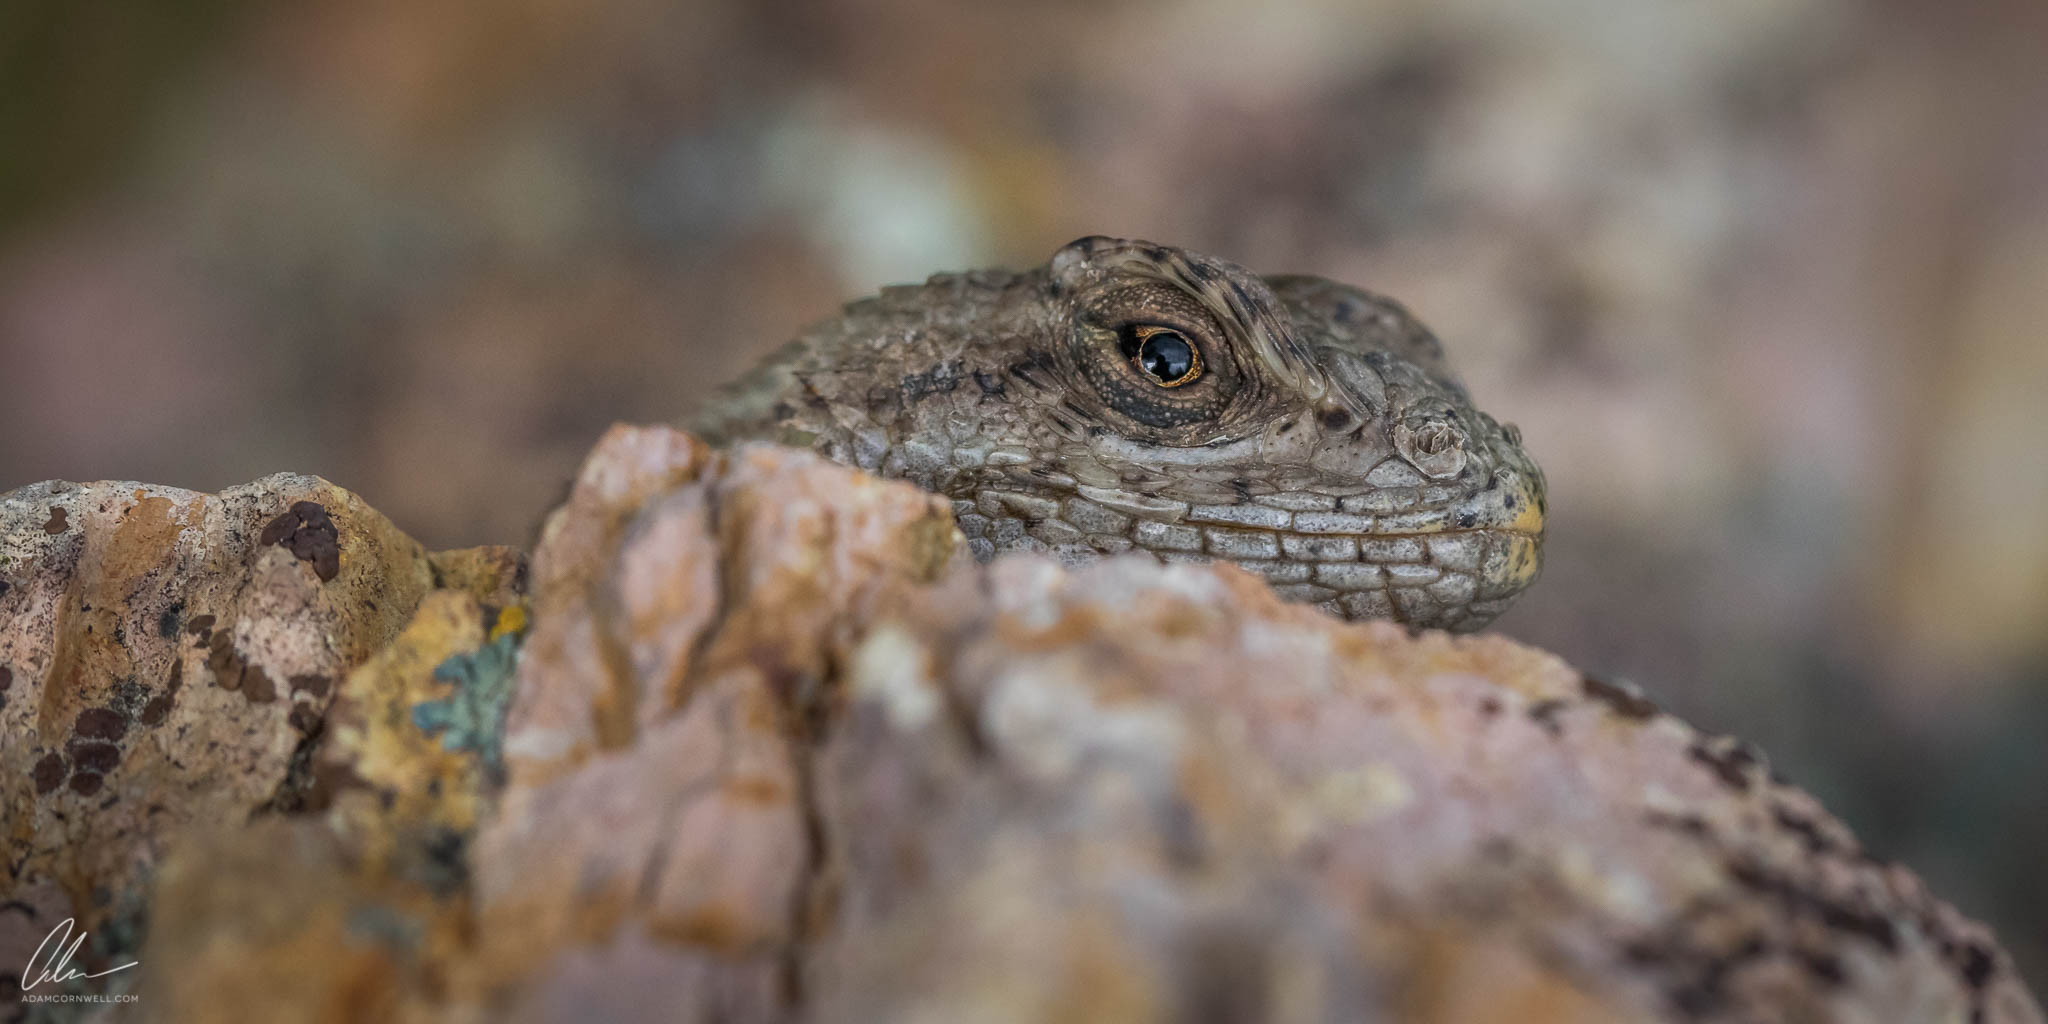   Western Fence Lizard  Painted Hills, OR #20150522_0217 